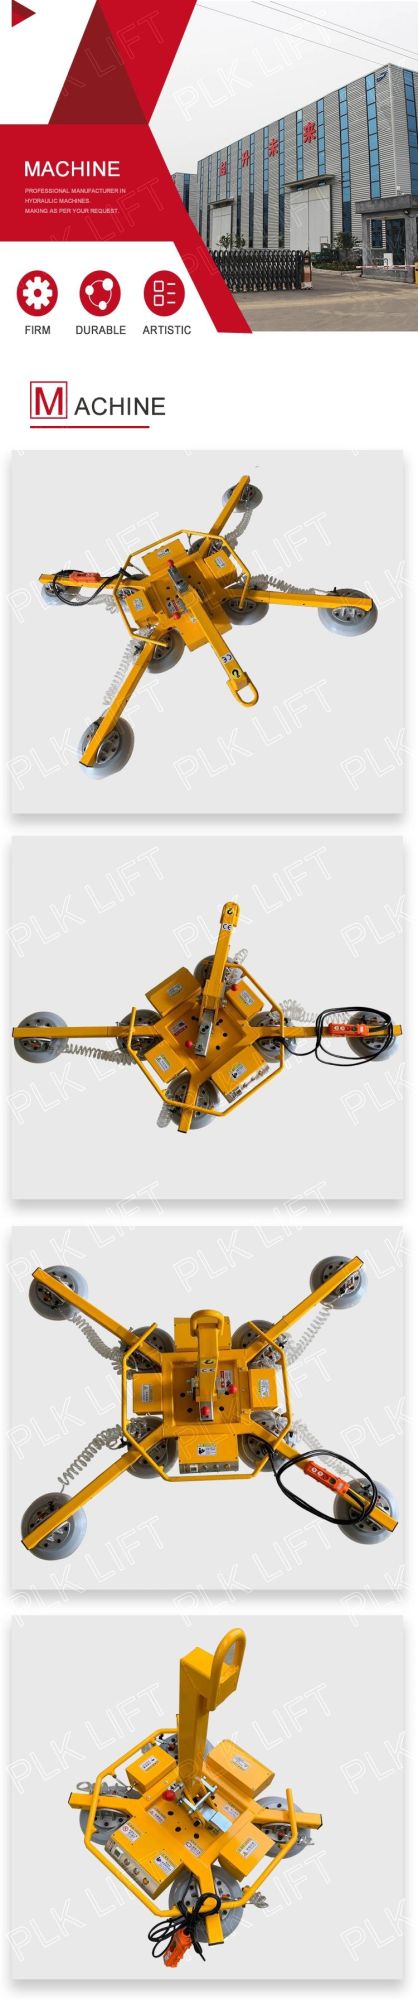 800kg Industrial Heavy Duty Vacuum Lifter for Glass